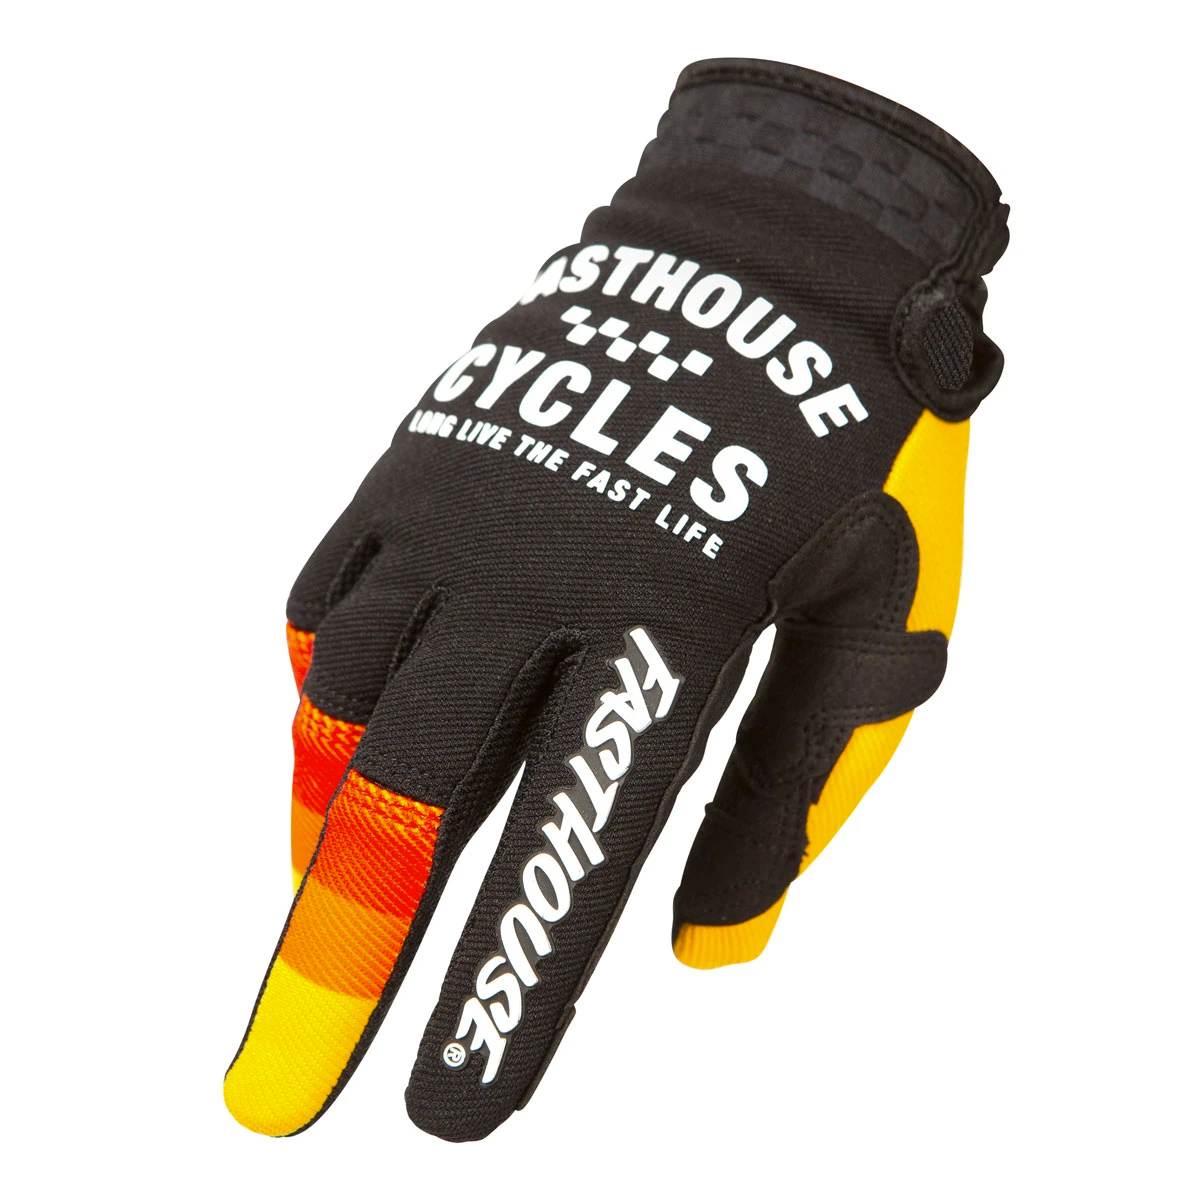 Fasthouse | Pacer Youth Gloves Men's | Size Medium in Black/Yellow